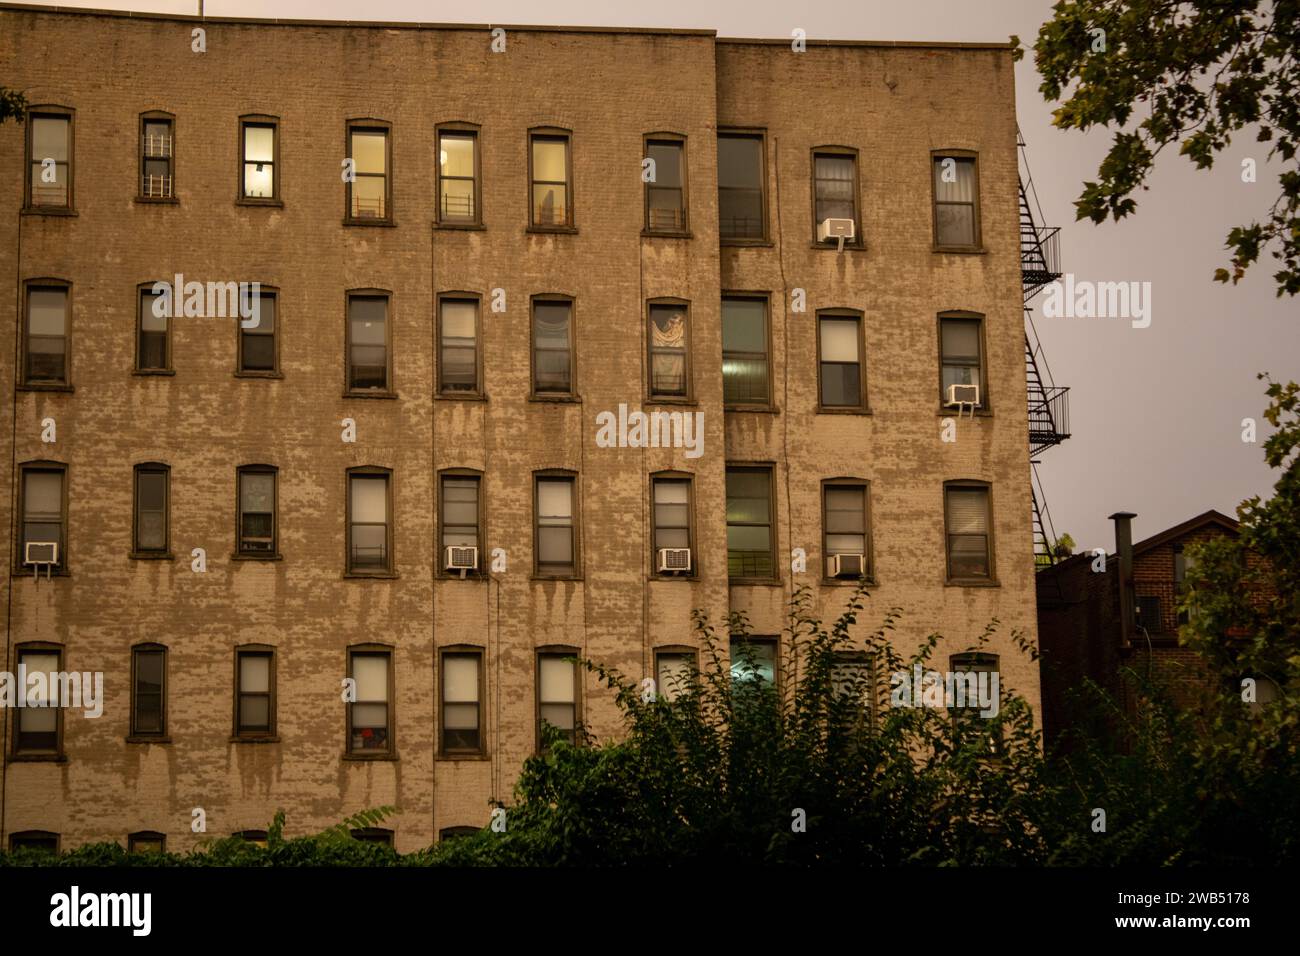 This image is of a tall brick building with numerous windows adorning its facade Stock Photo